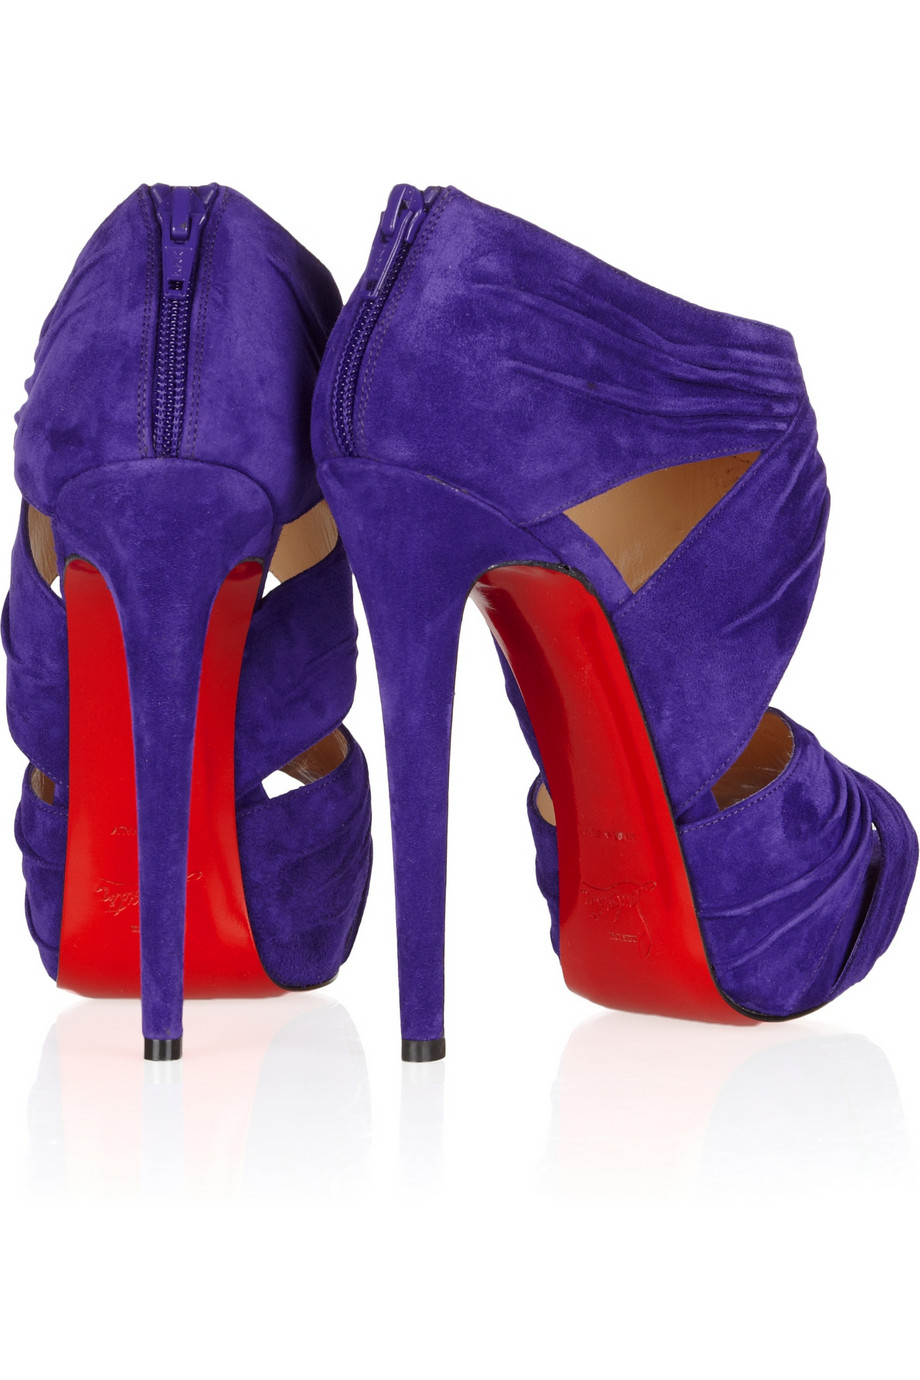 Christian Louboutin Bandra 140 Ruched Suede Sandals in Violet (Purple) -  Lyst